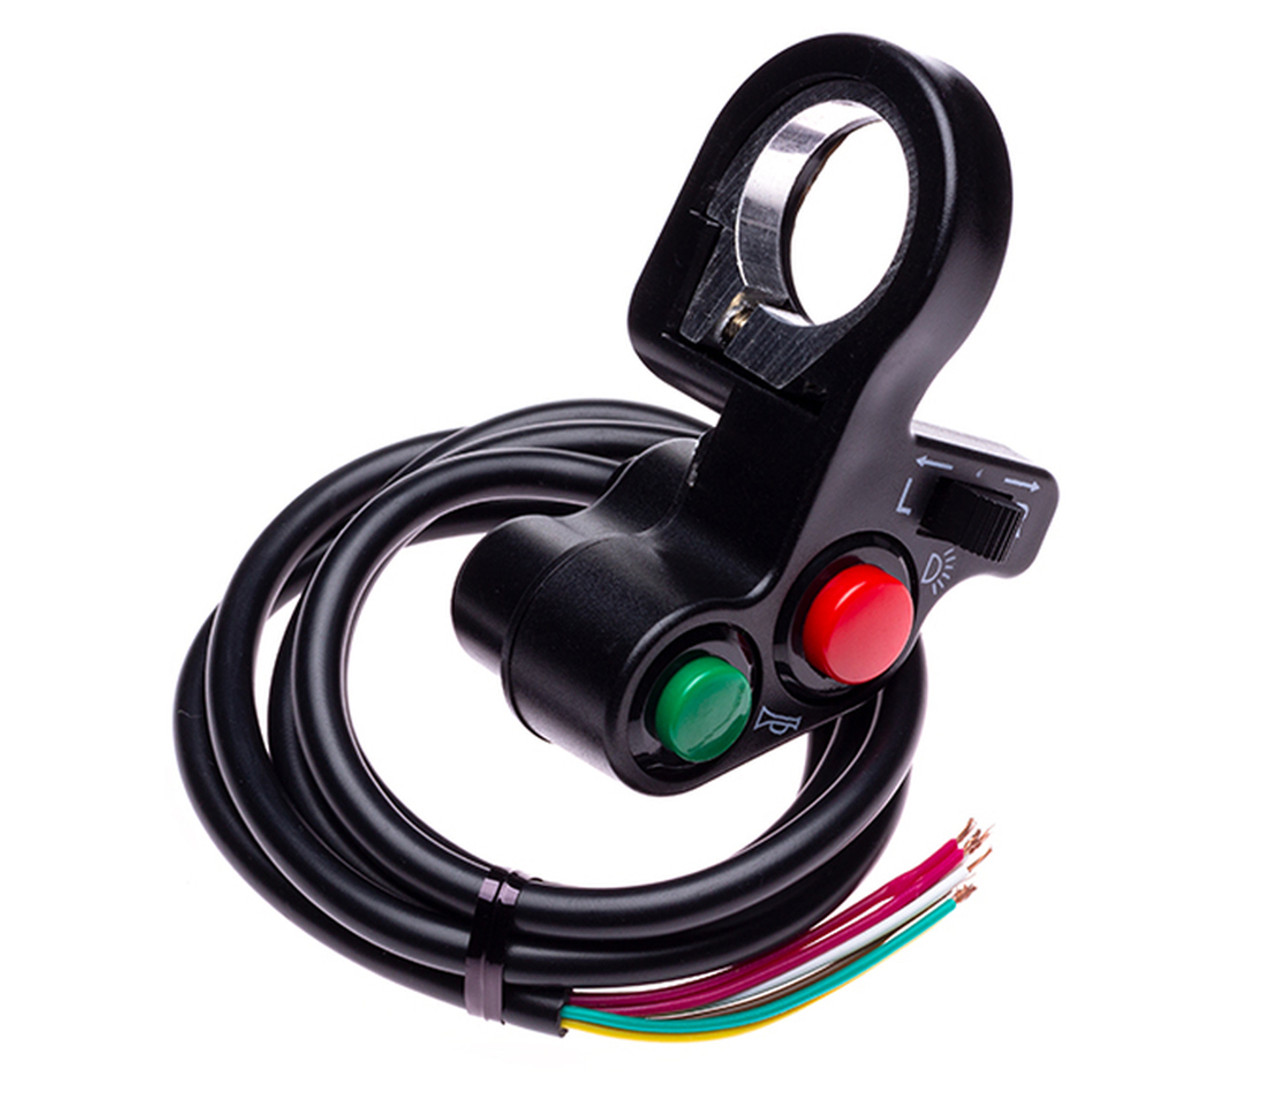 Commodo ABS Turn signals / Horn / Lights for handlebars 22mm